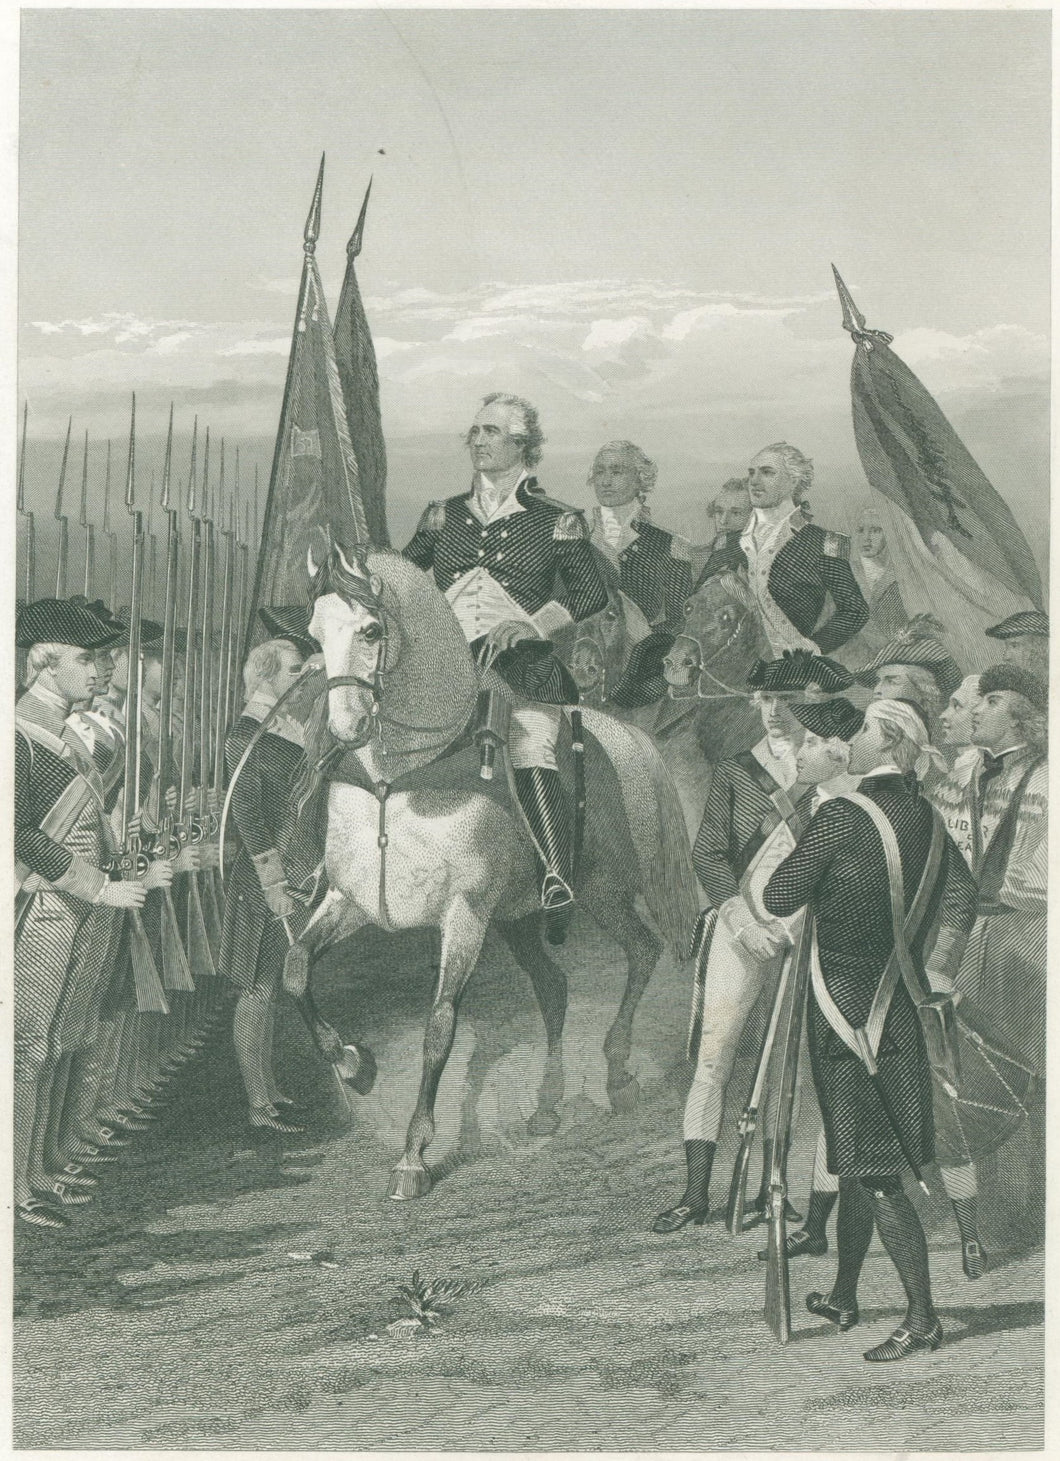 Chappel, Alonzo.  “Washington Taking Command of the Army”